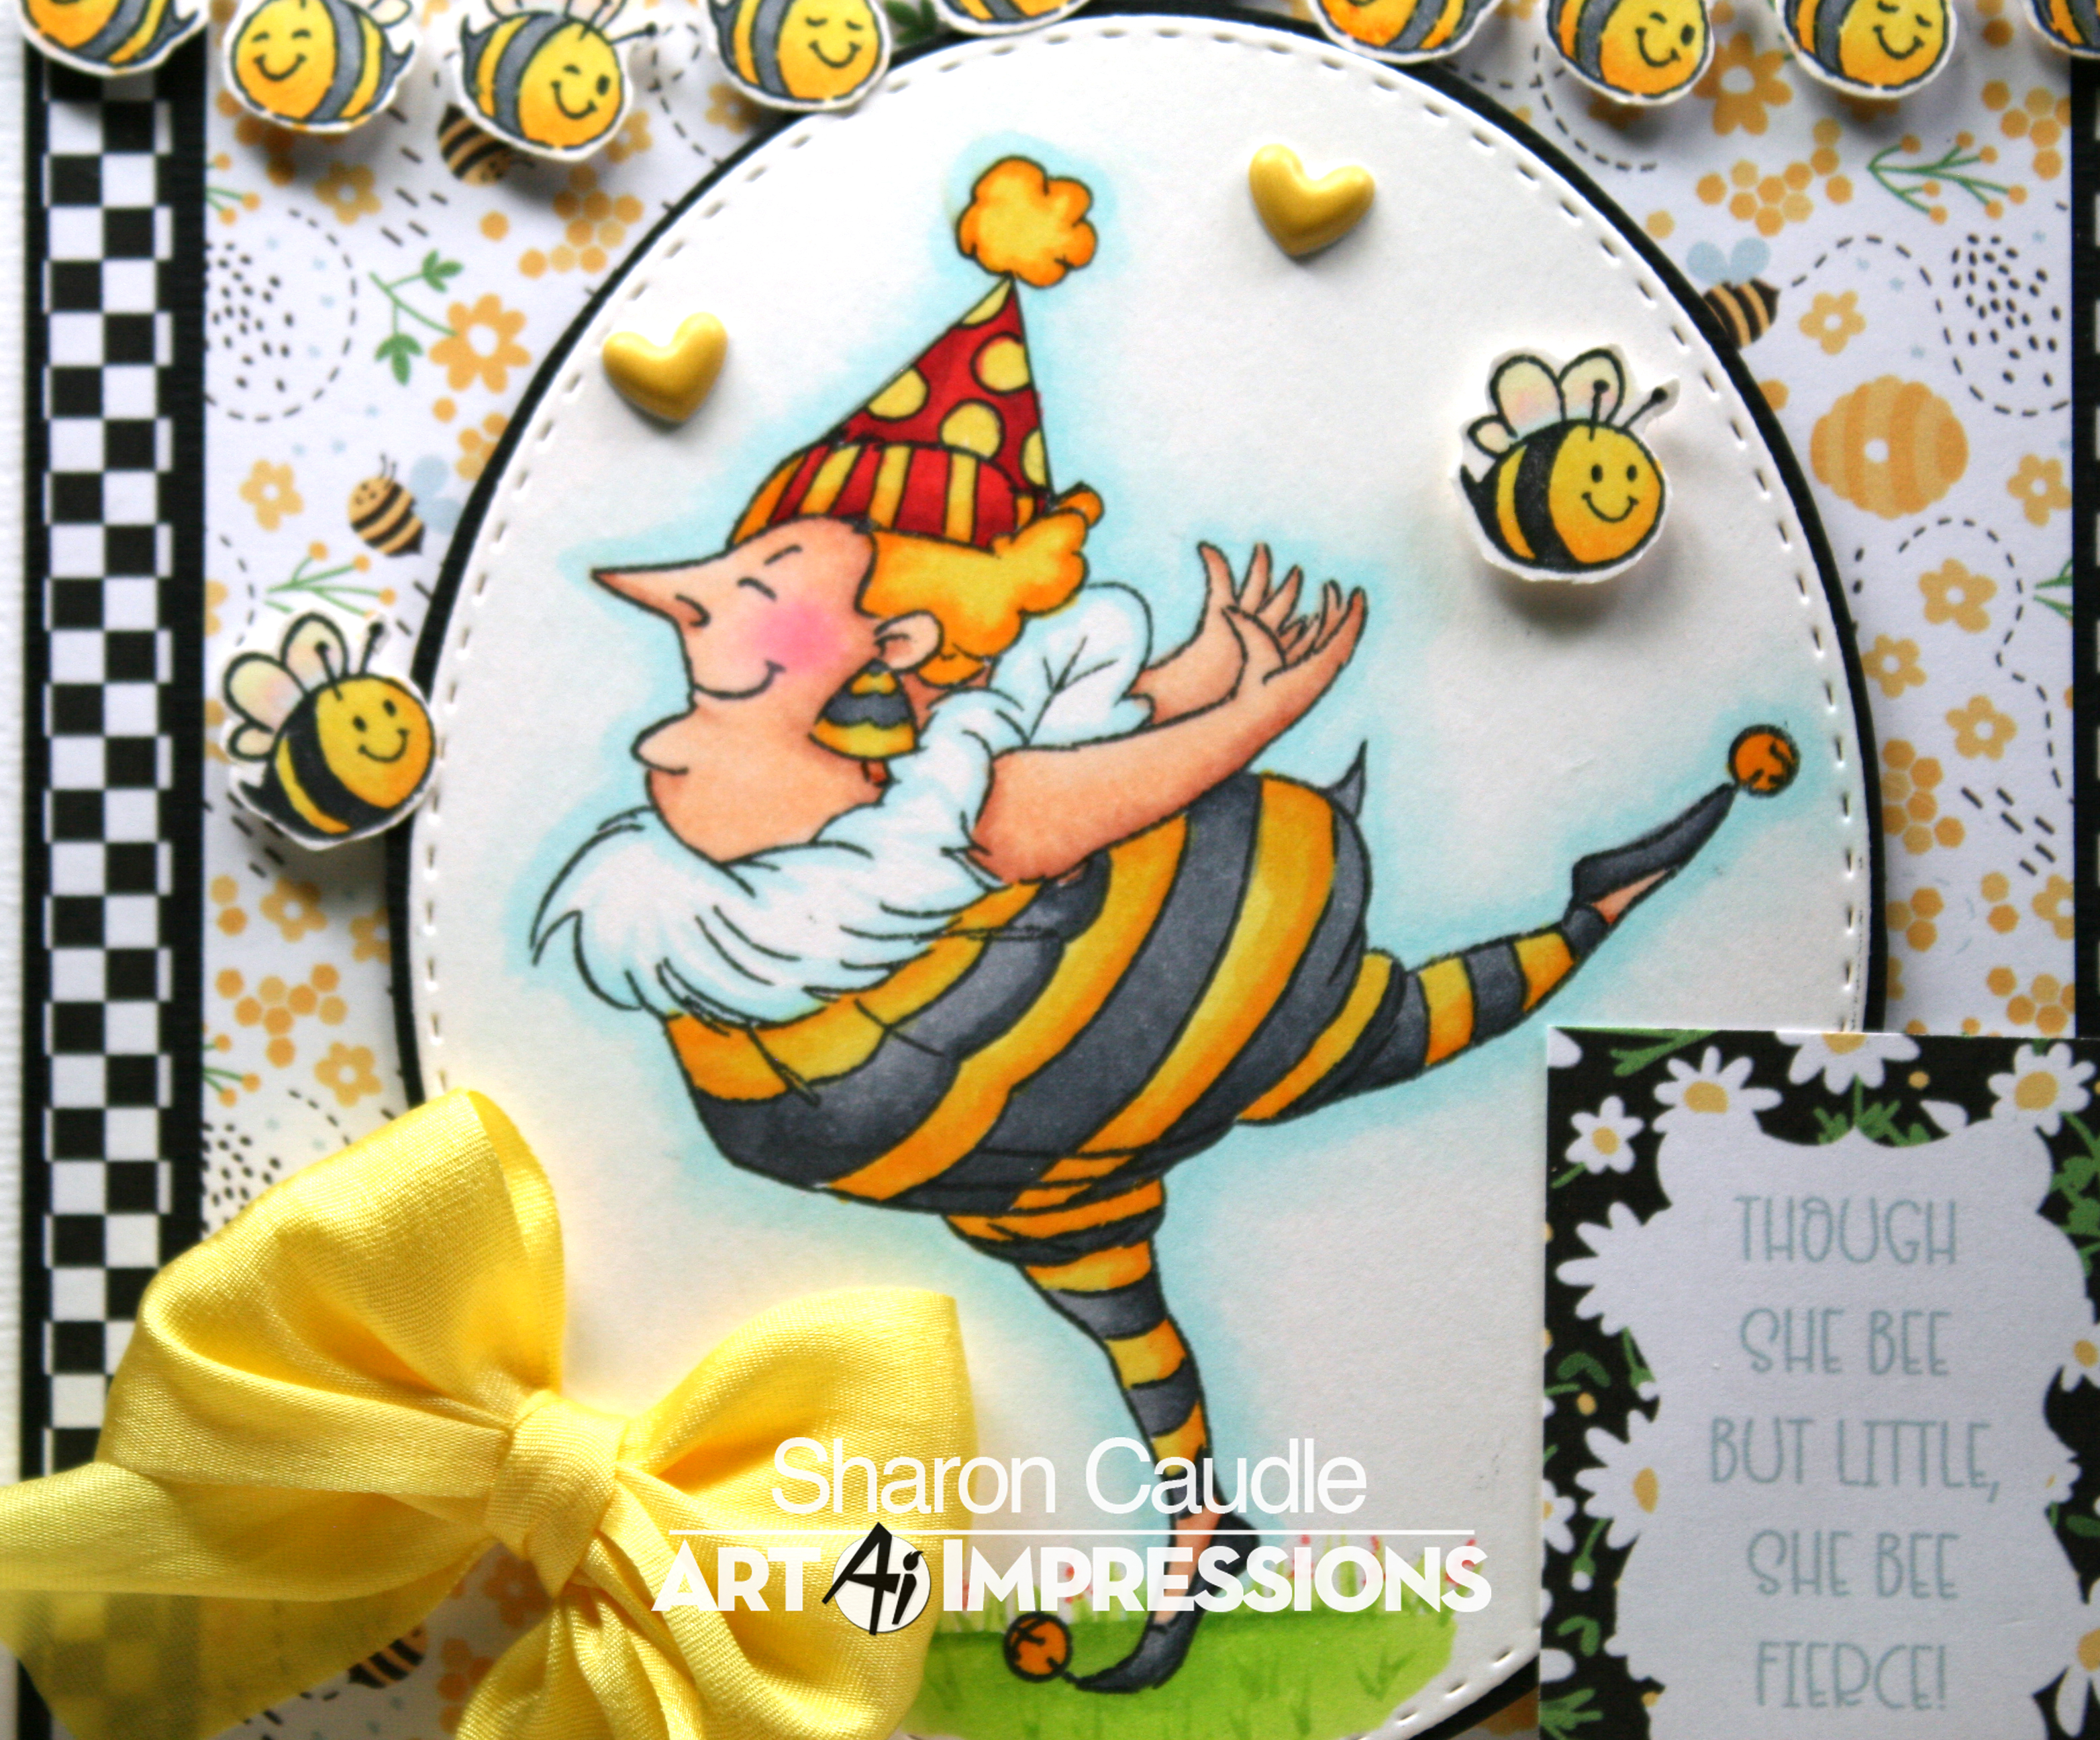 Bee Paper Company Archives - The Artistic Gnome Blog